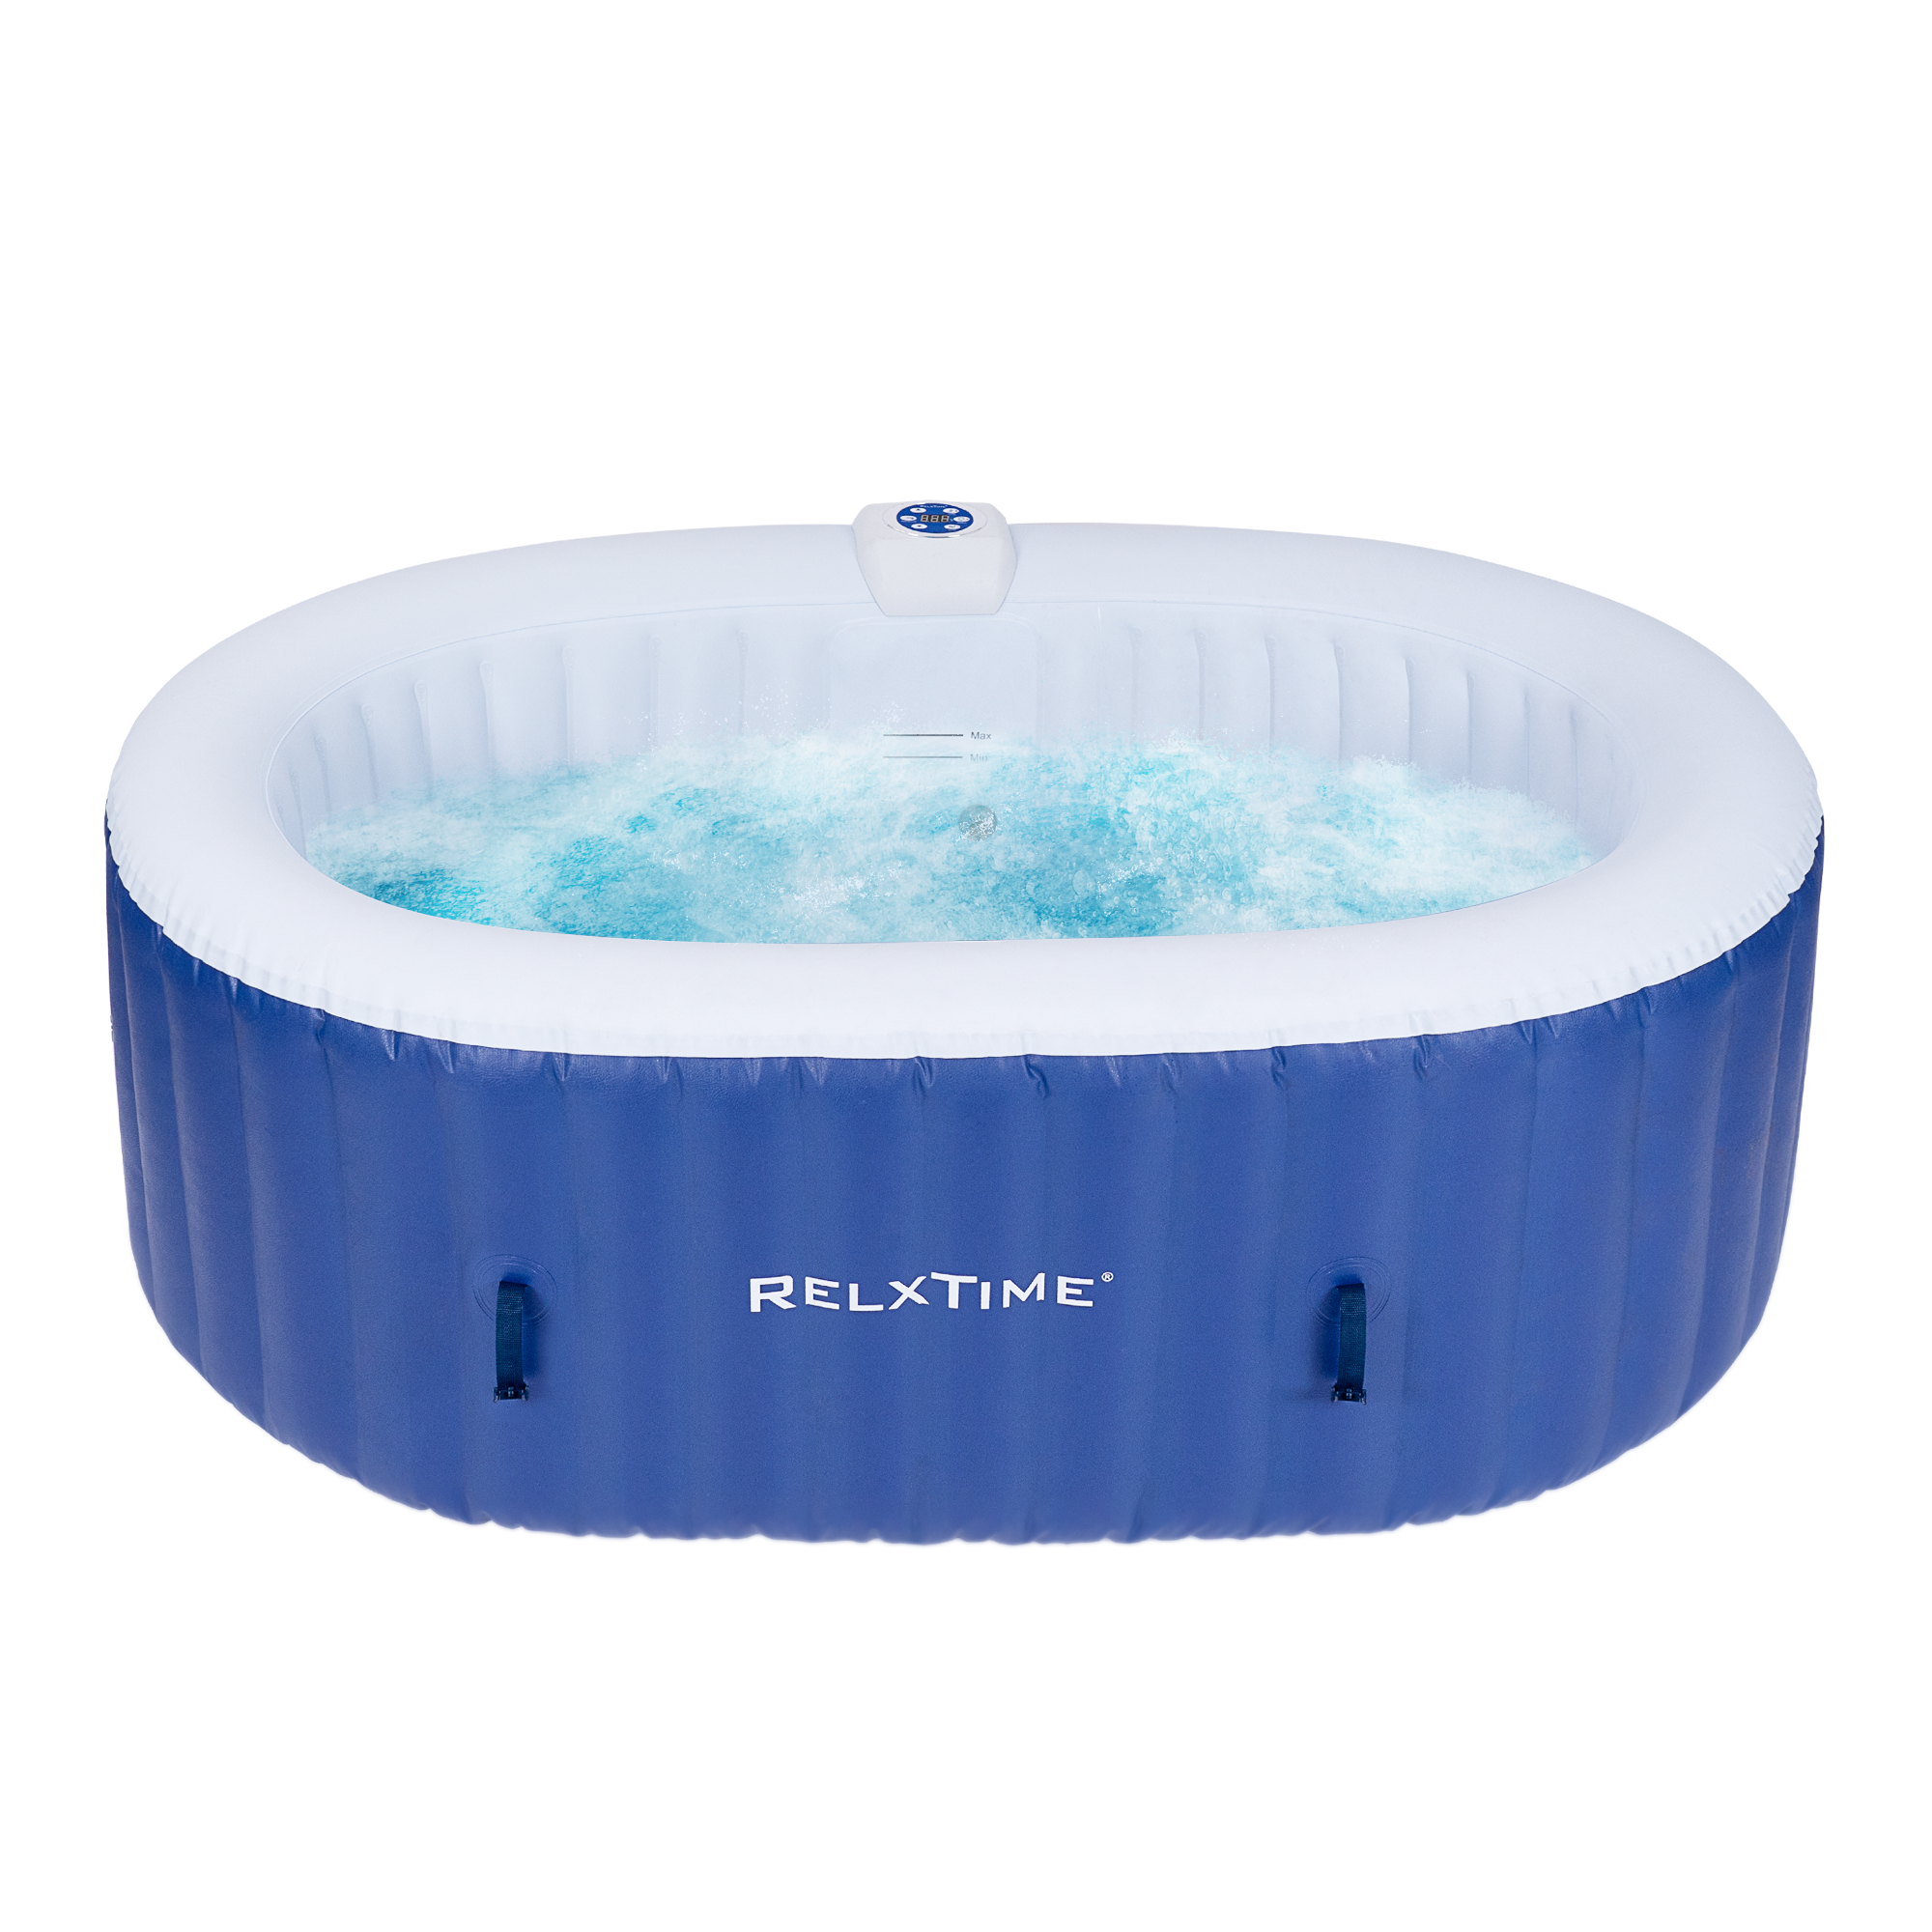 Relxtime 2 Person Oval Inflatable Hot Tub 100 Massaging Air Jets Blue Laminated Vogue Spa